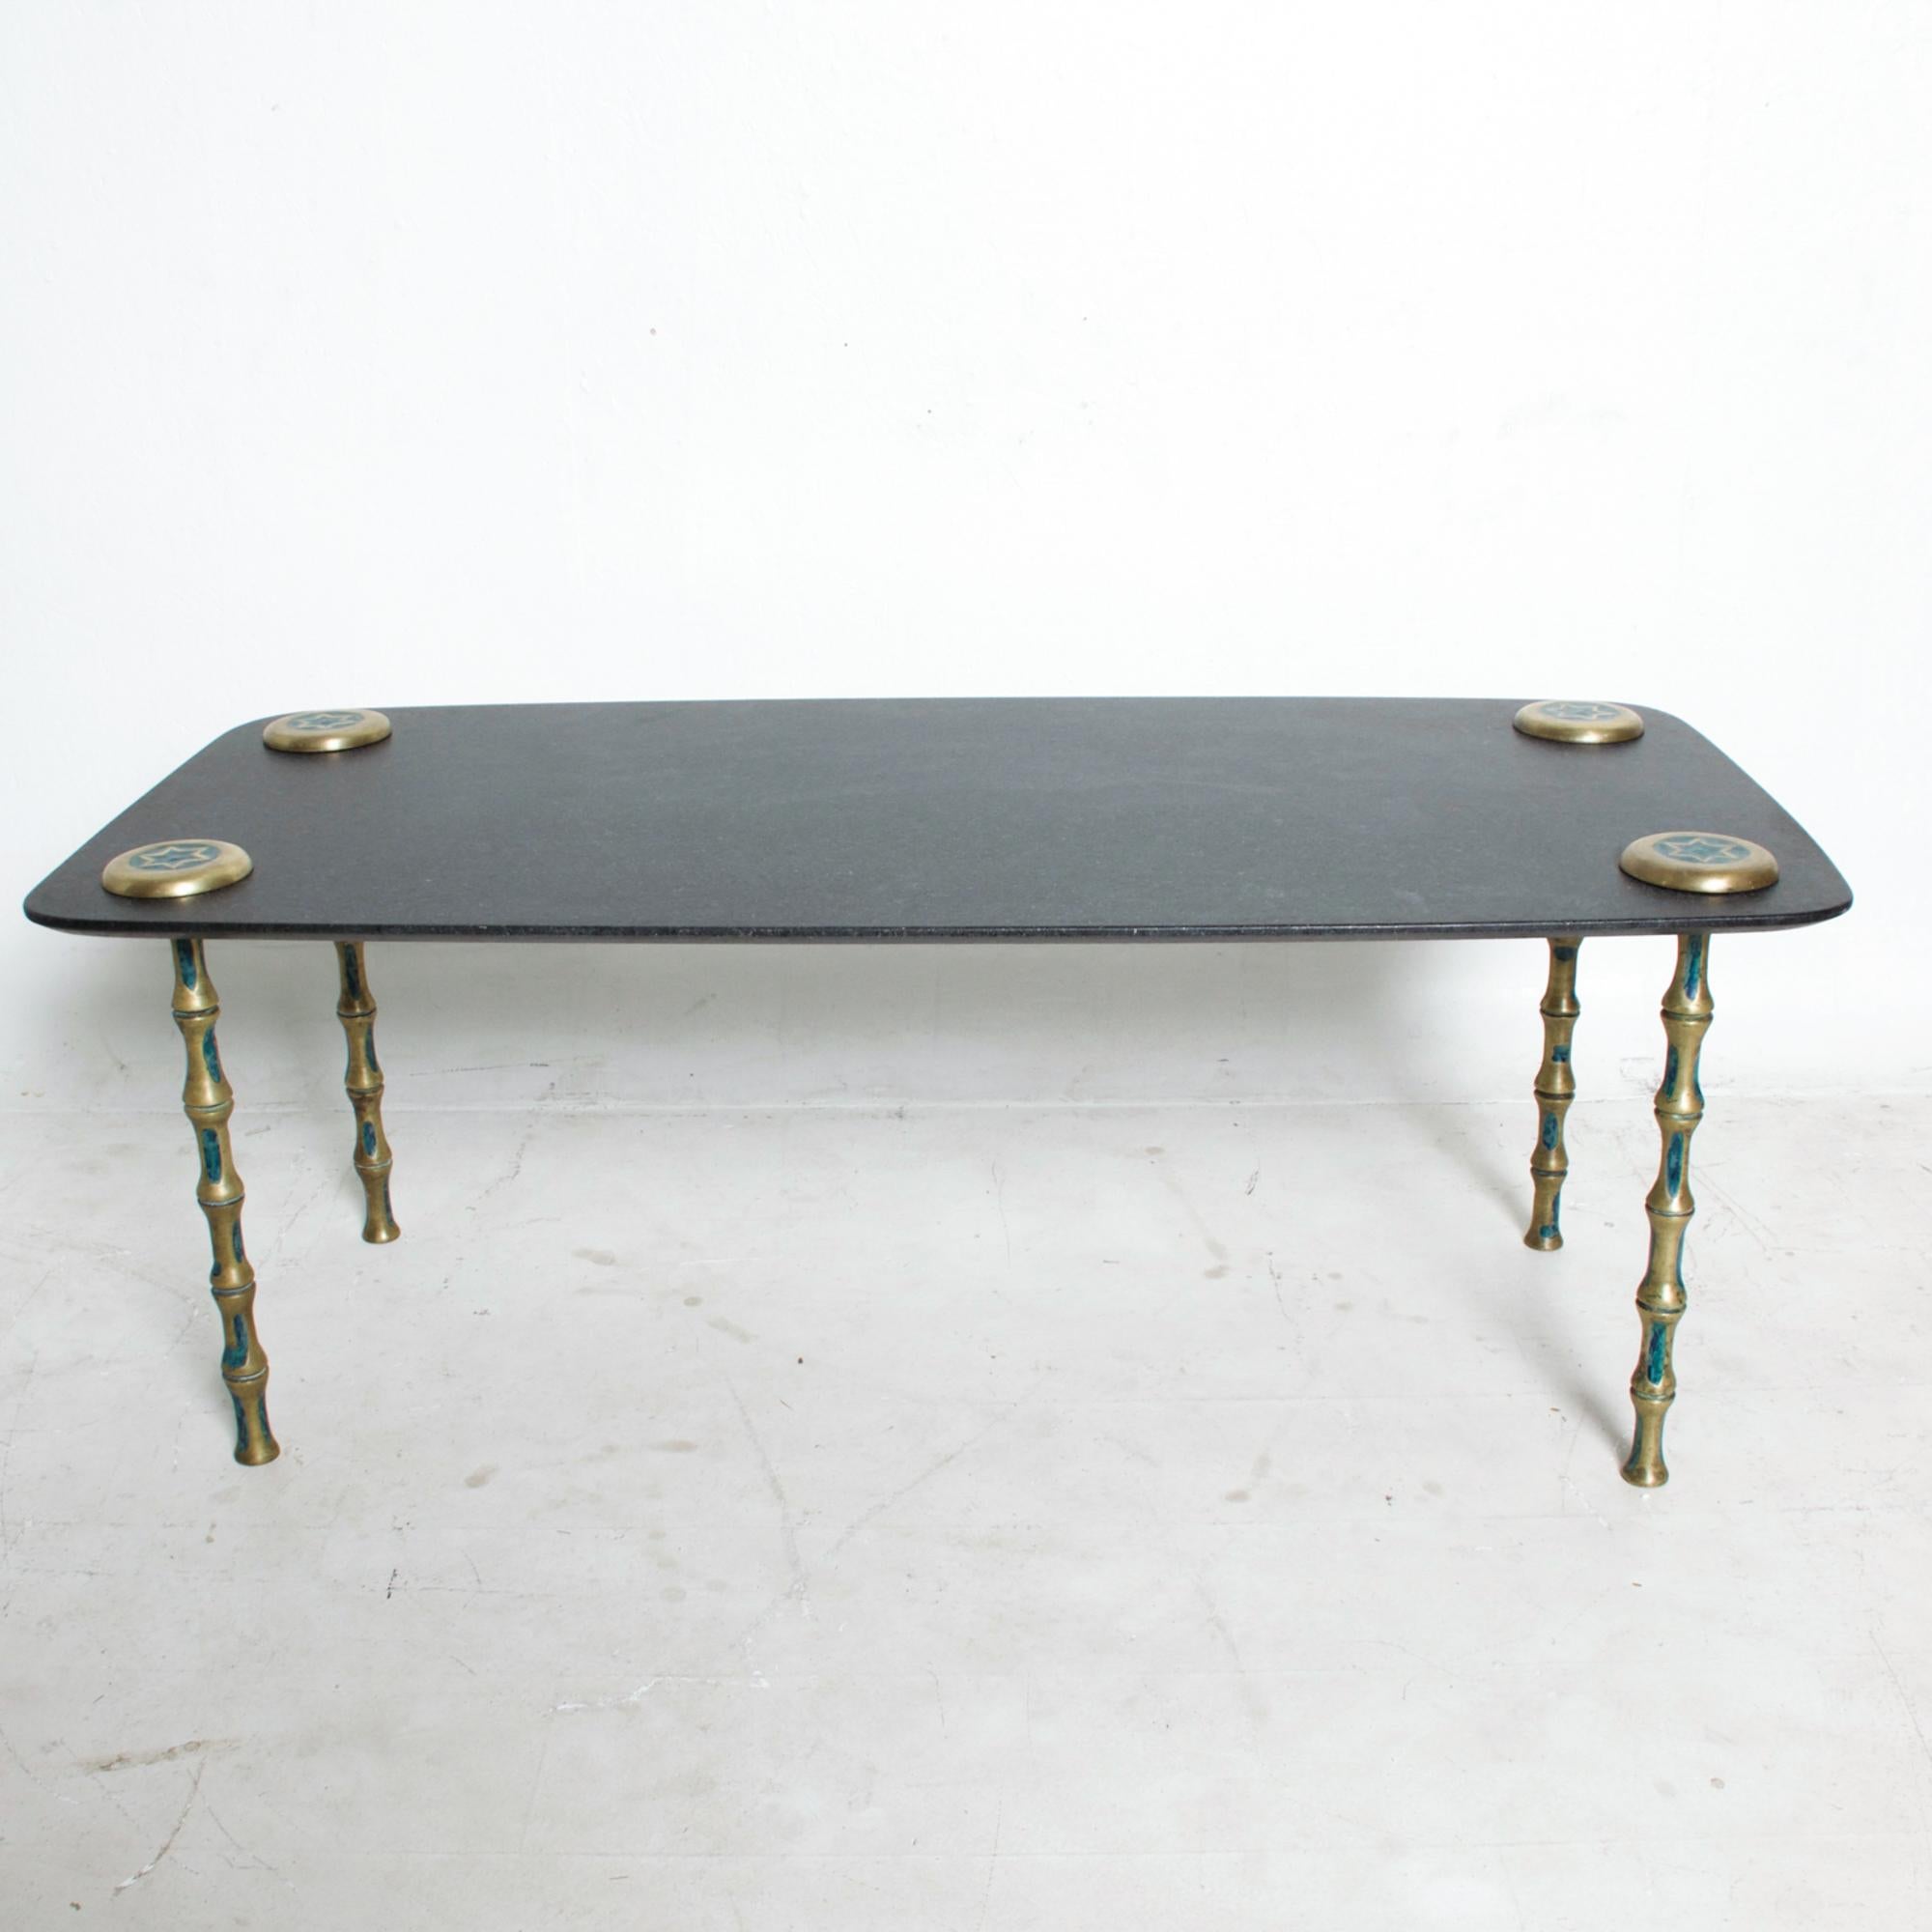 For your consideration: 1950s Pepe Mendoza large coffee table designed in Marble, Brass and Malachite Mexican Modernism at its best.
Dimensions are: 55 L x 26.5 W x 21.5 H
Original vintage preowned unrestored condition. Please refer to Images